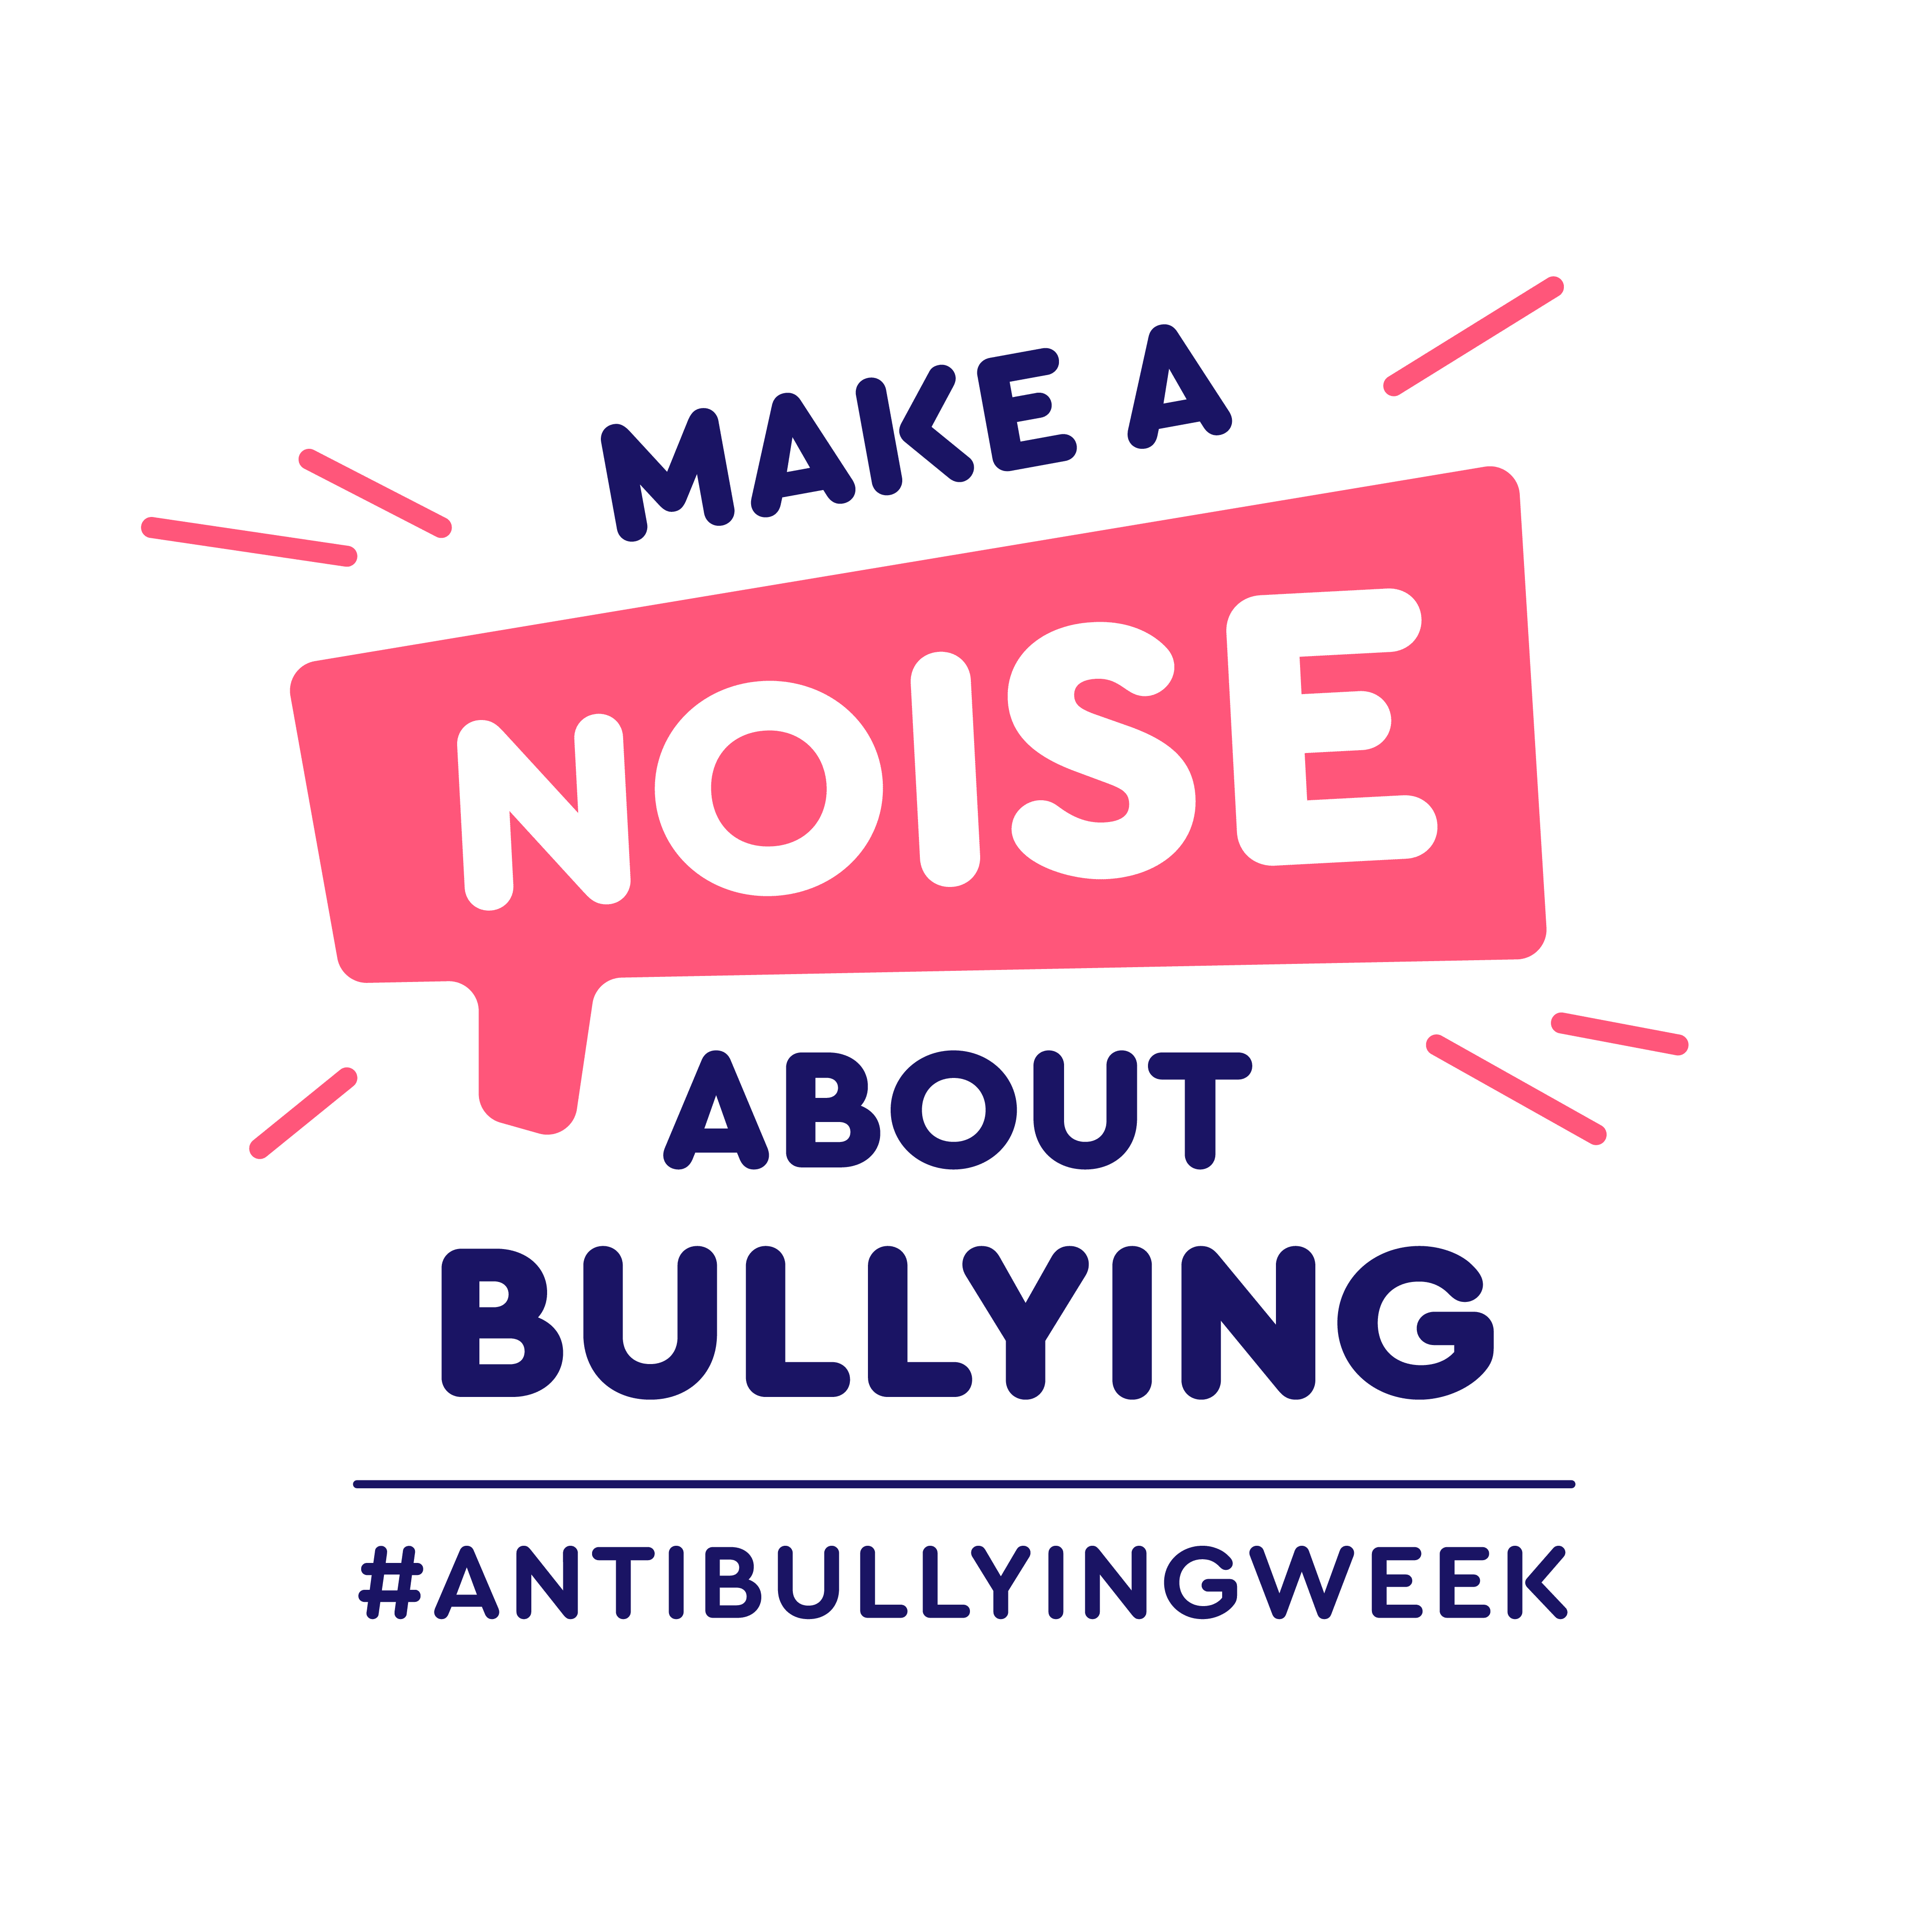 Make a Noise About Bullying - Anti-Bullying Week